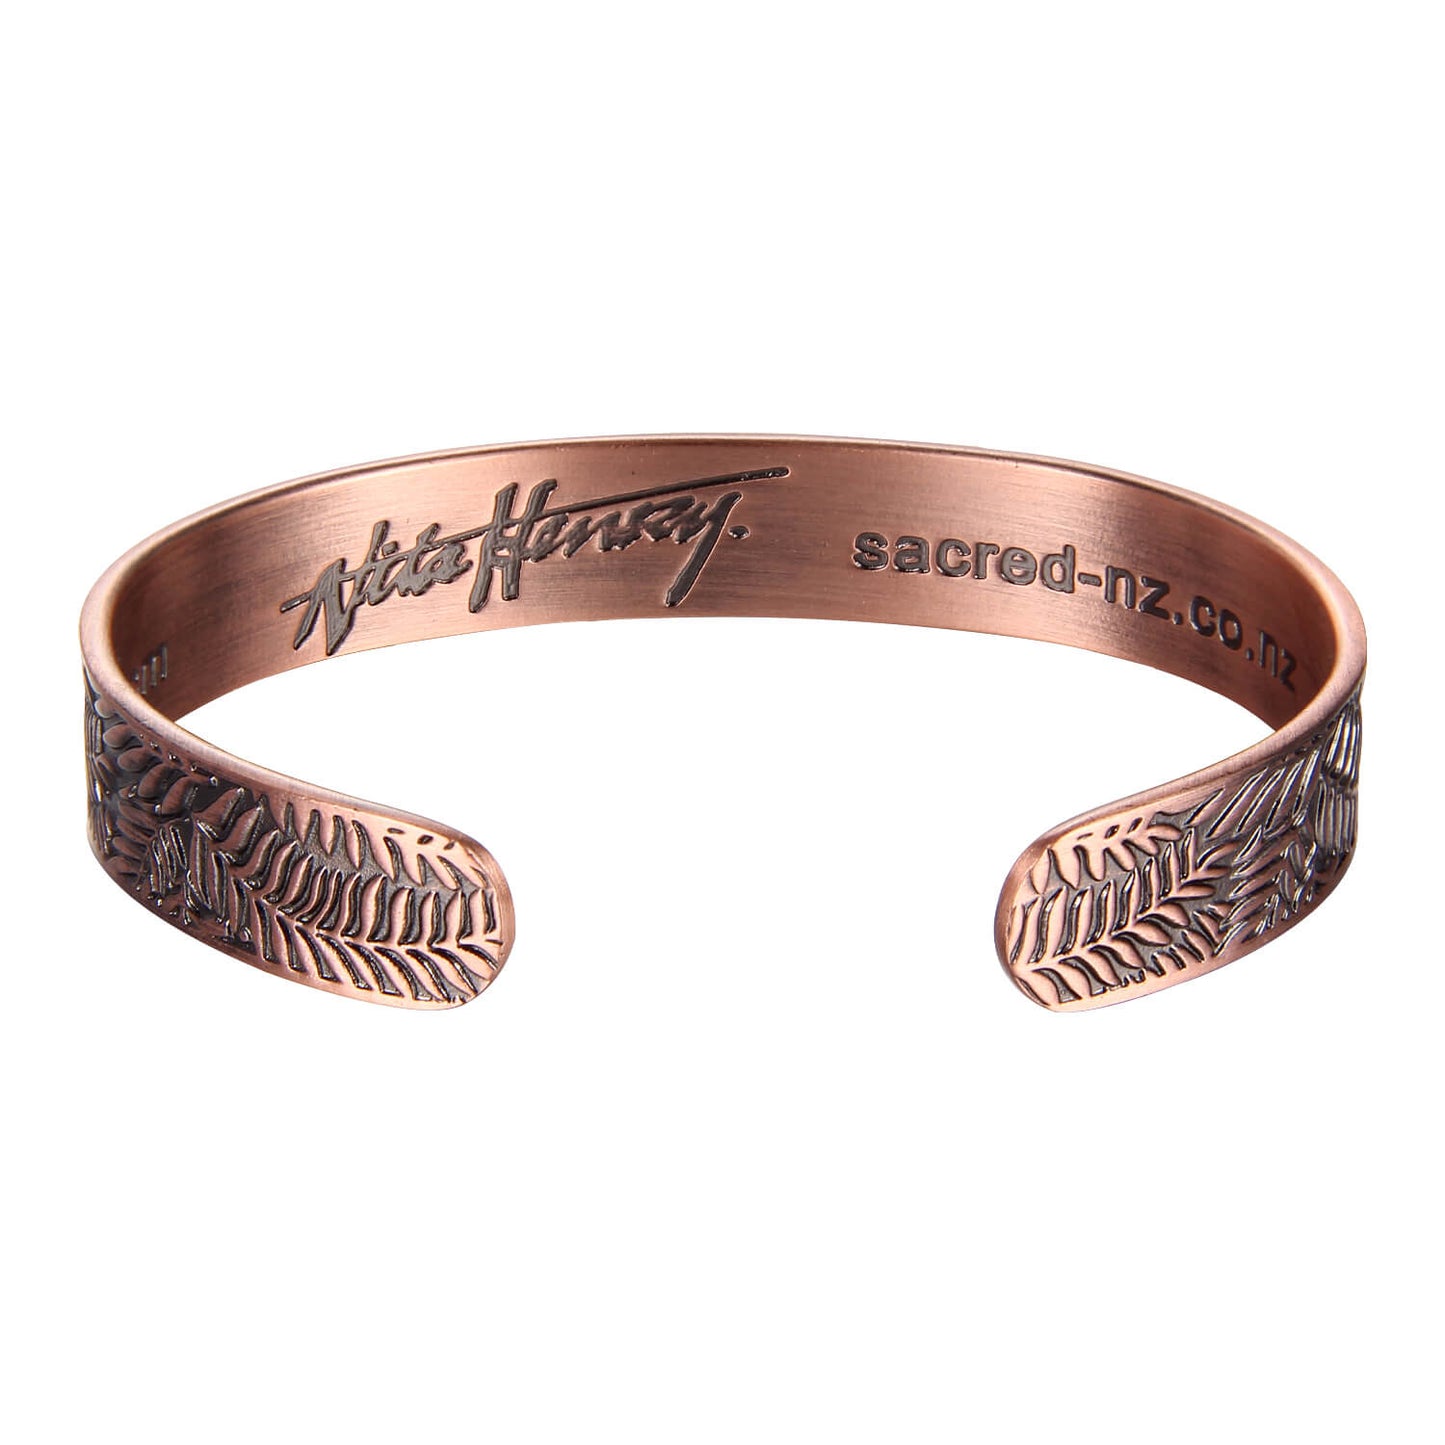 A5 100% Pure copper magnetic band ‘Fern’